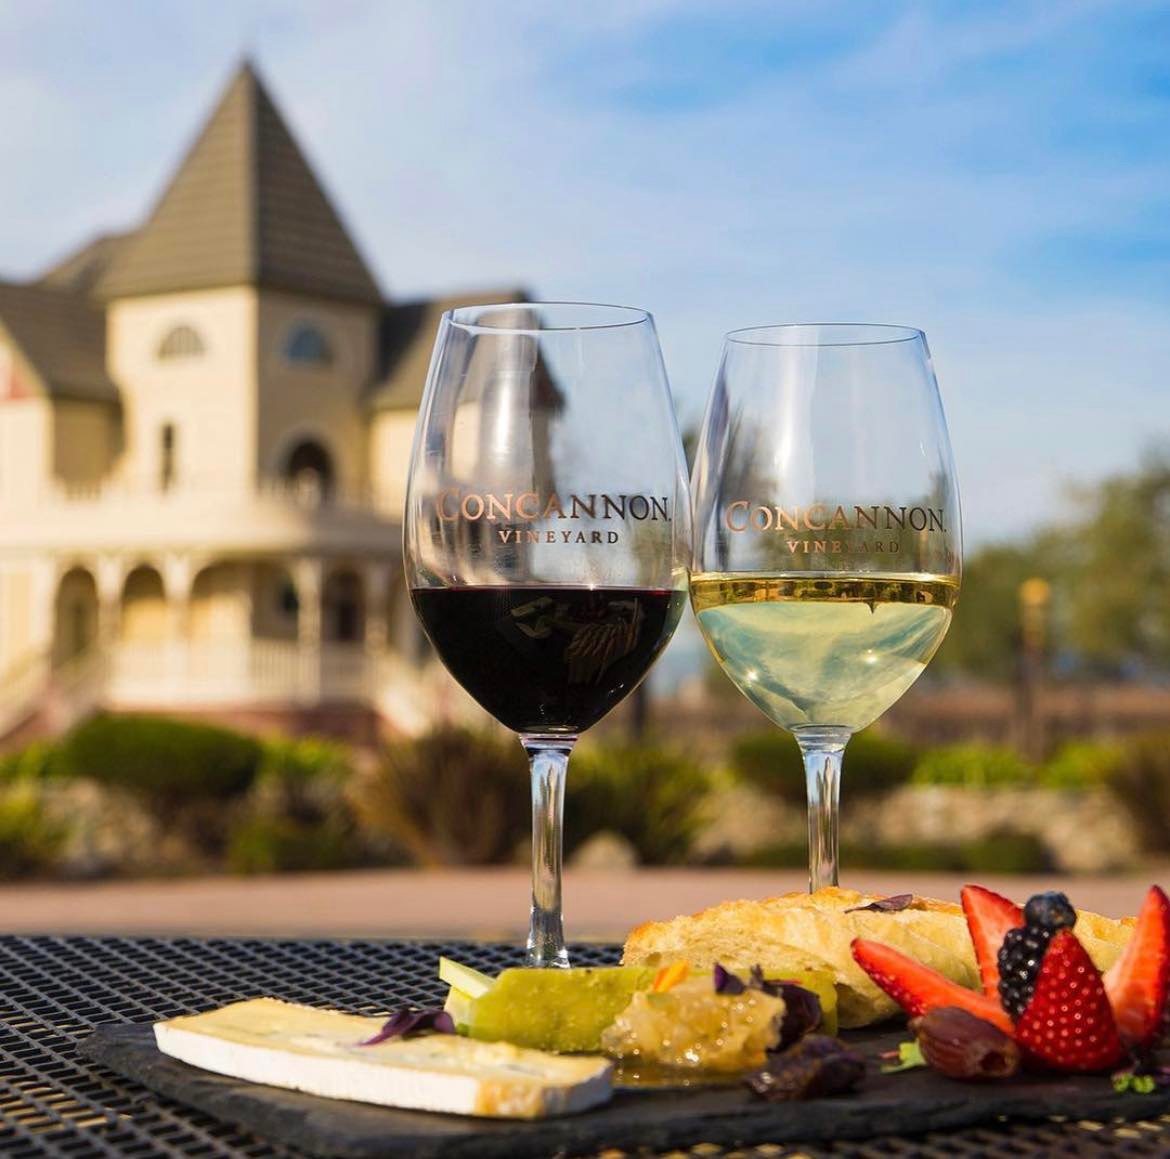 Two glasses of wine and a plate of fruit photographed with a large Victorian home in the background at Concannon Vineyard in Livermore, CA